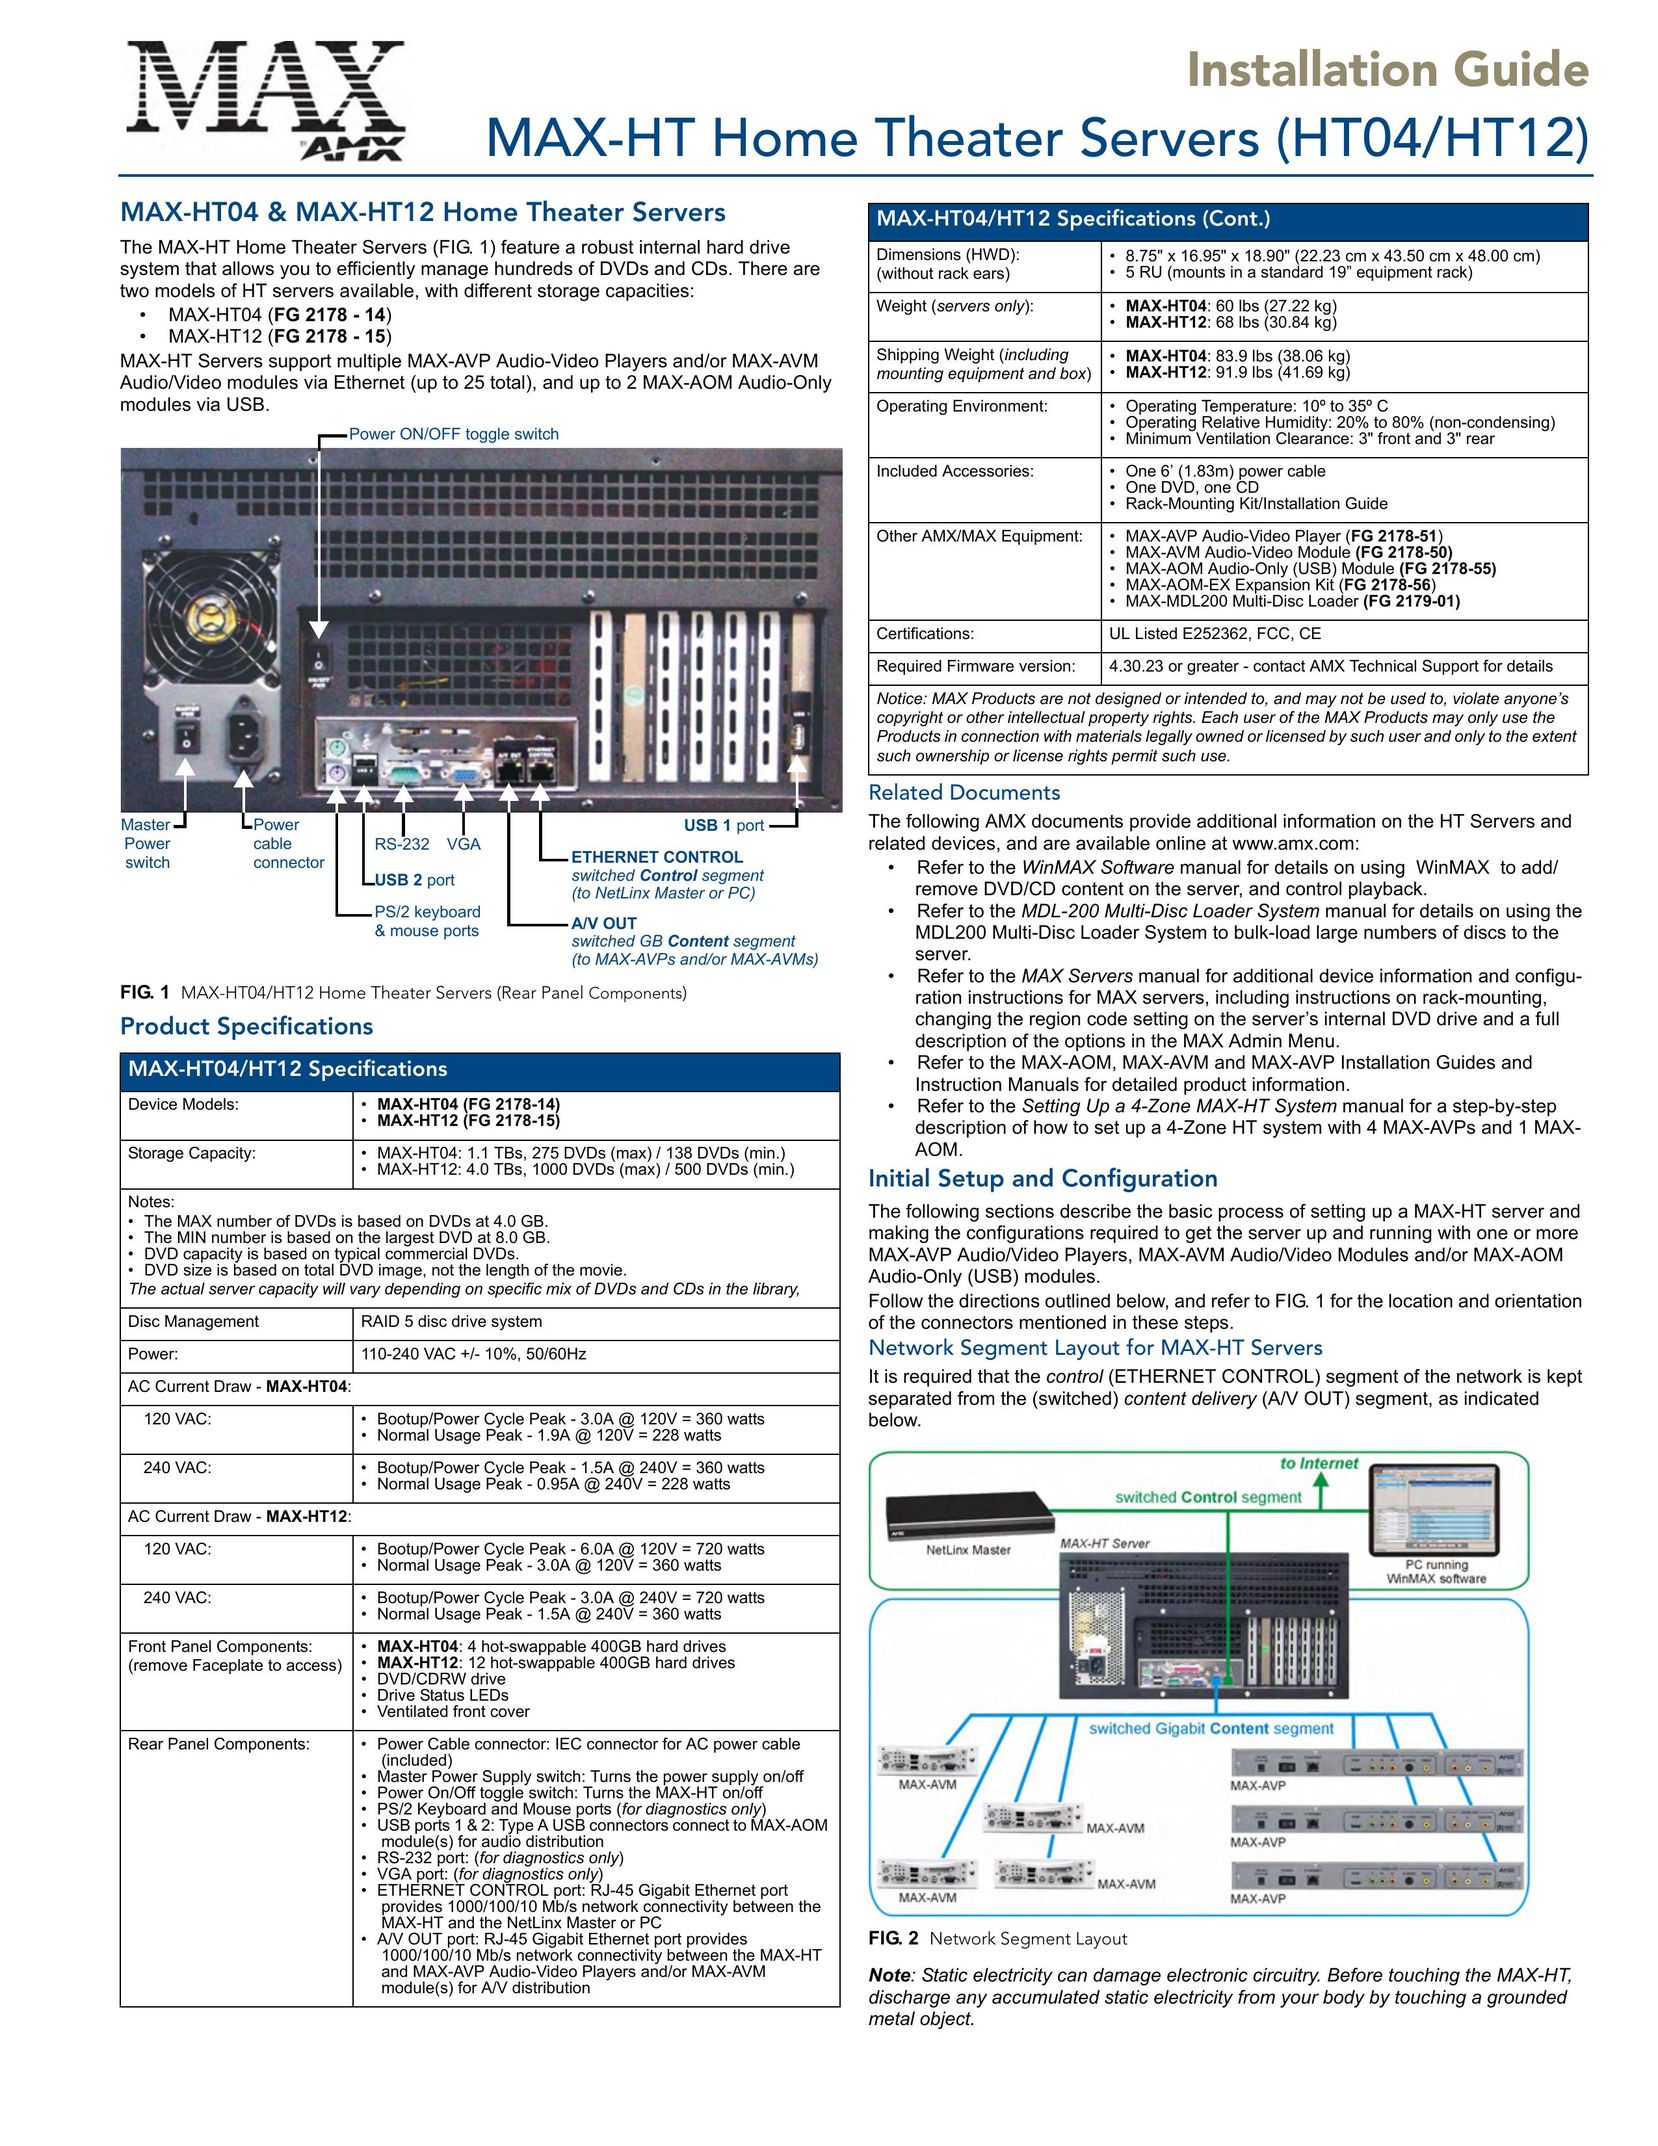 AMX HT12 Home Theater Server User Manual